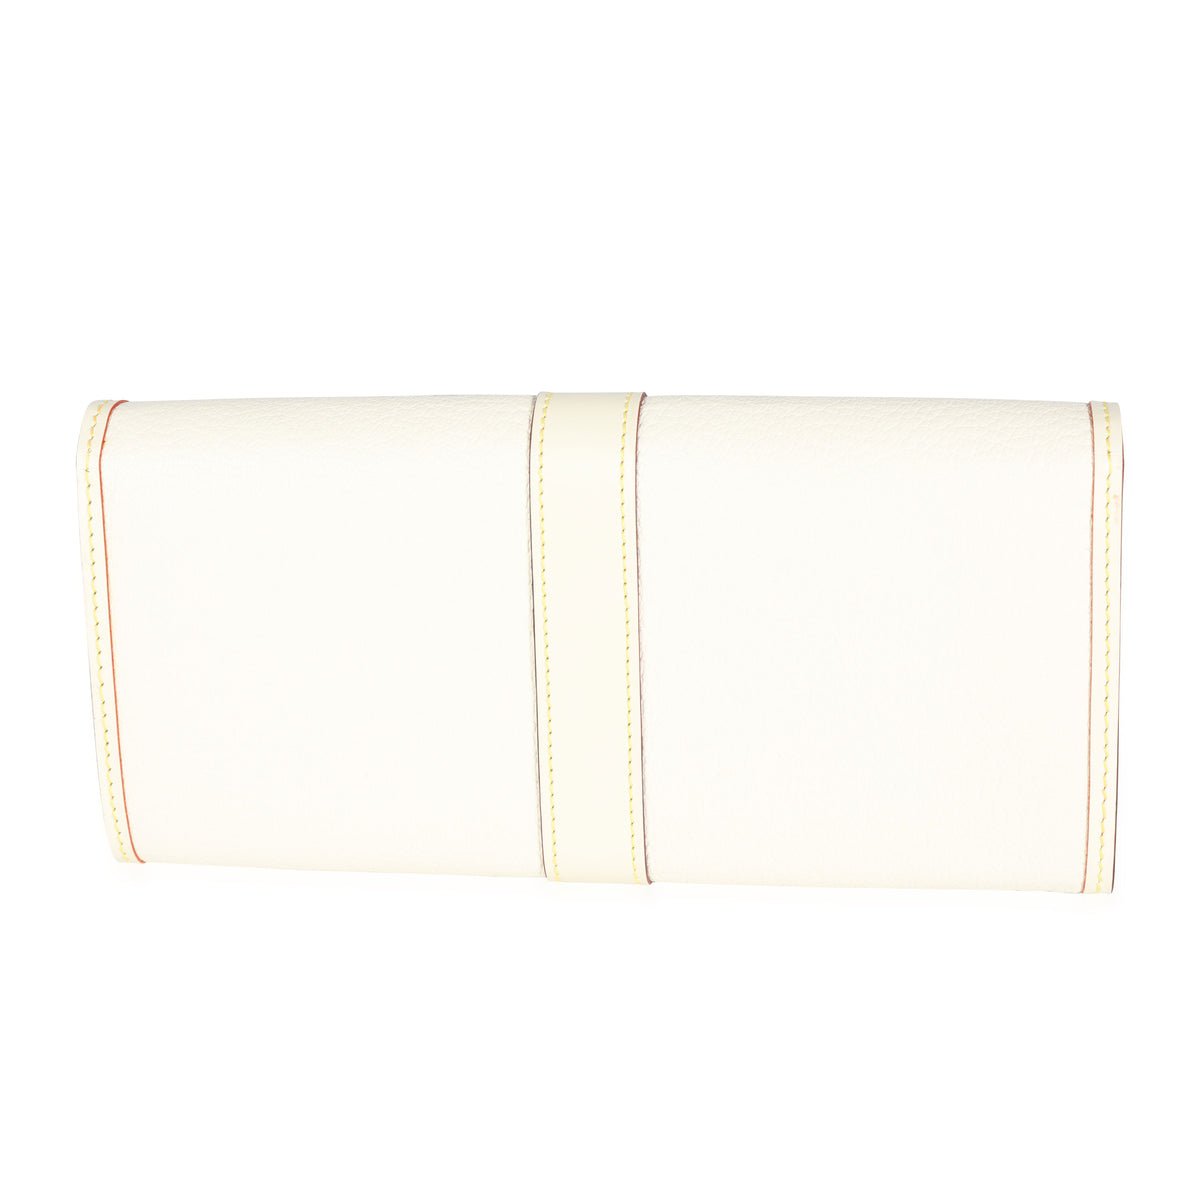 White Suhali leather Louis Vuitton Le Favori wallet with brass